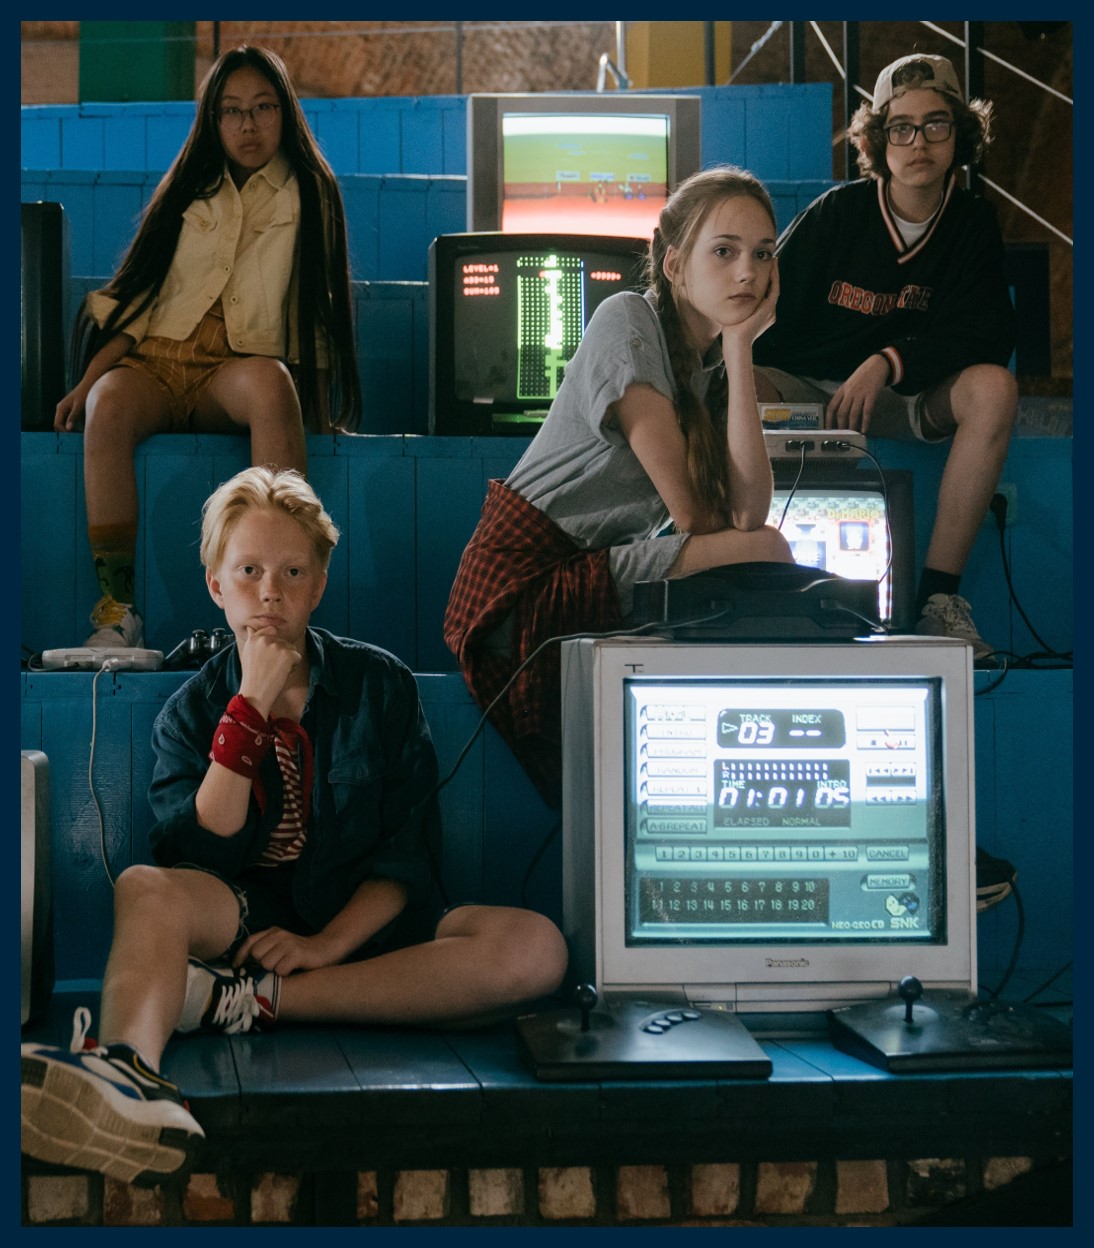 A group of young people looking at the camera. There are old televisions between them with different programs on.